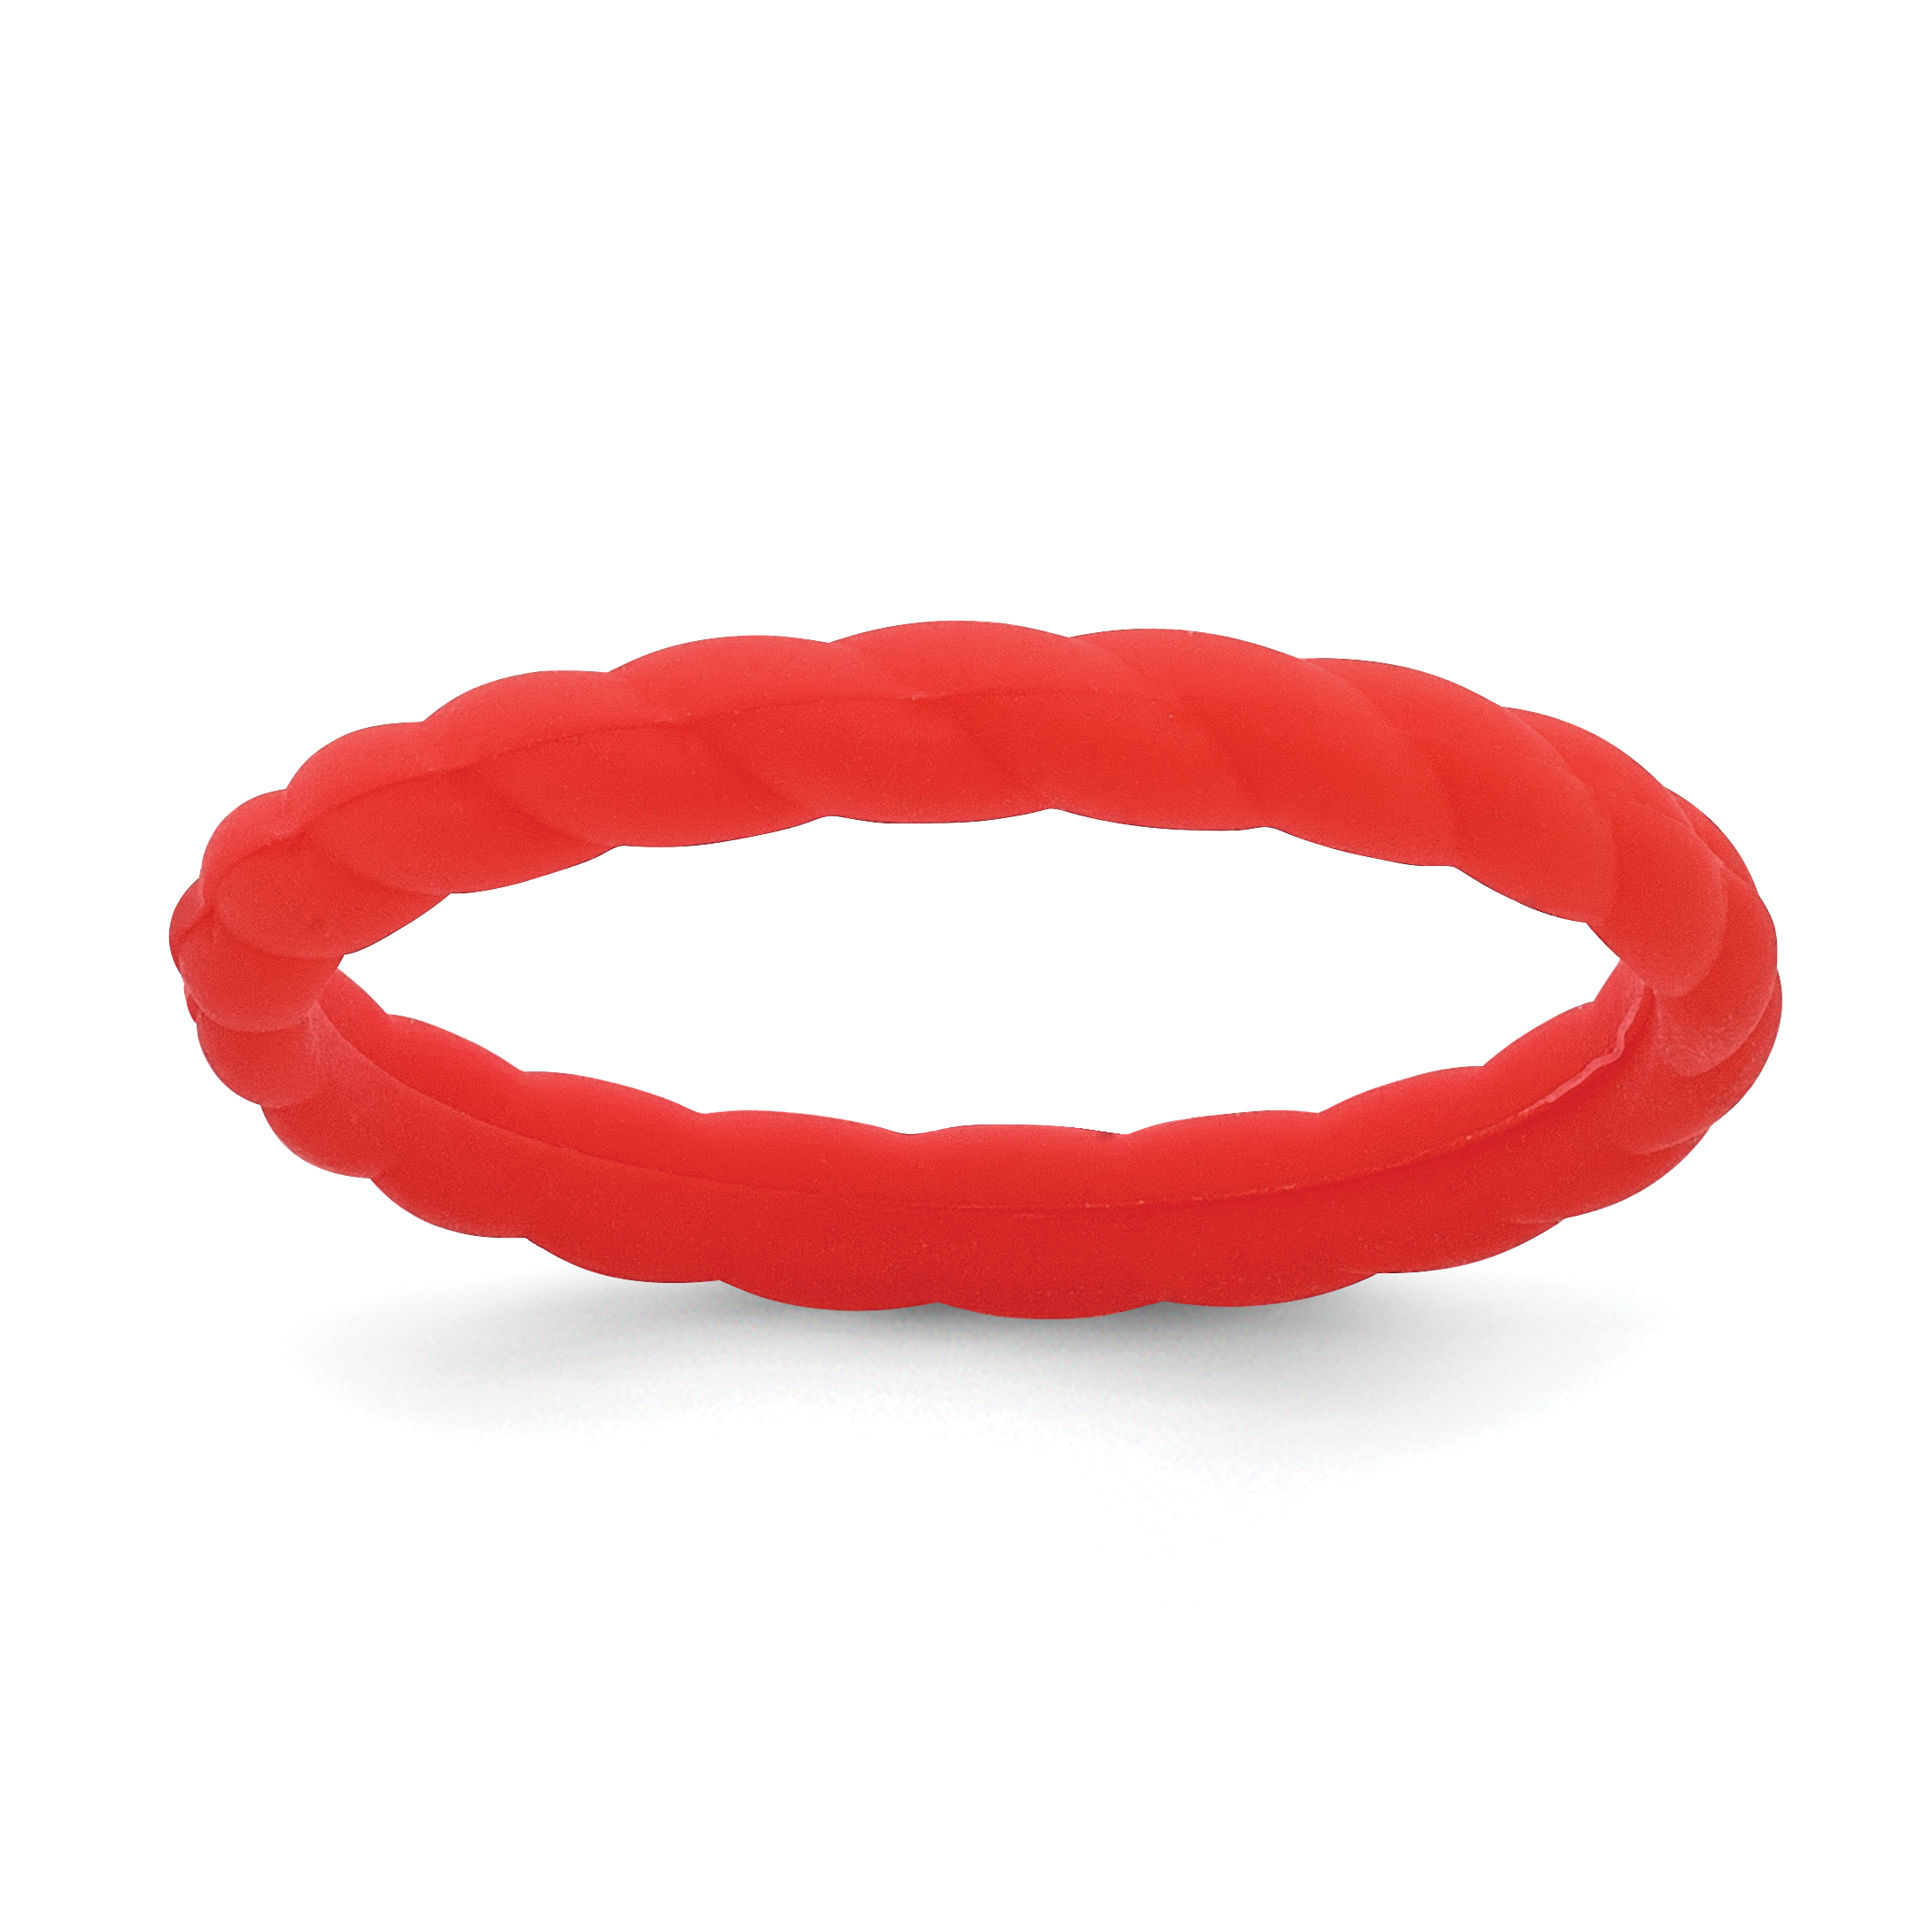 10 Dozen Silicone Wristbands, Adult-size Rubber Bracelets, Great For Event- Red - Walmart.com